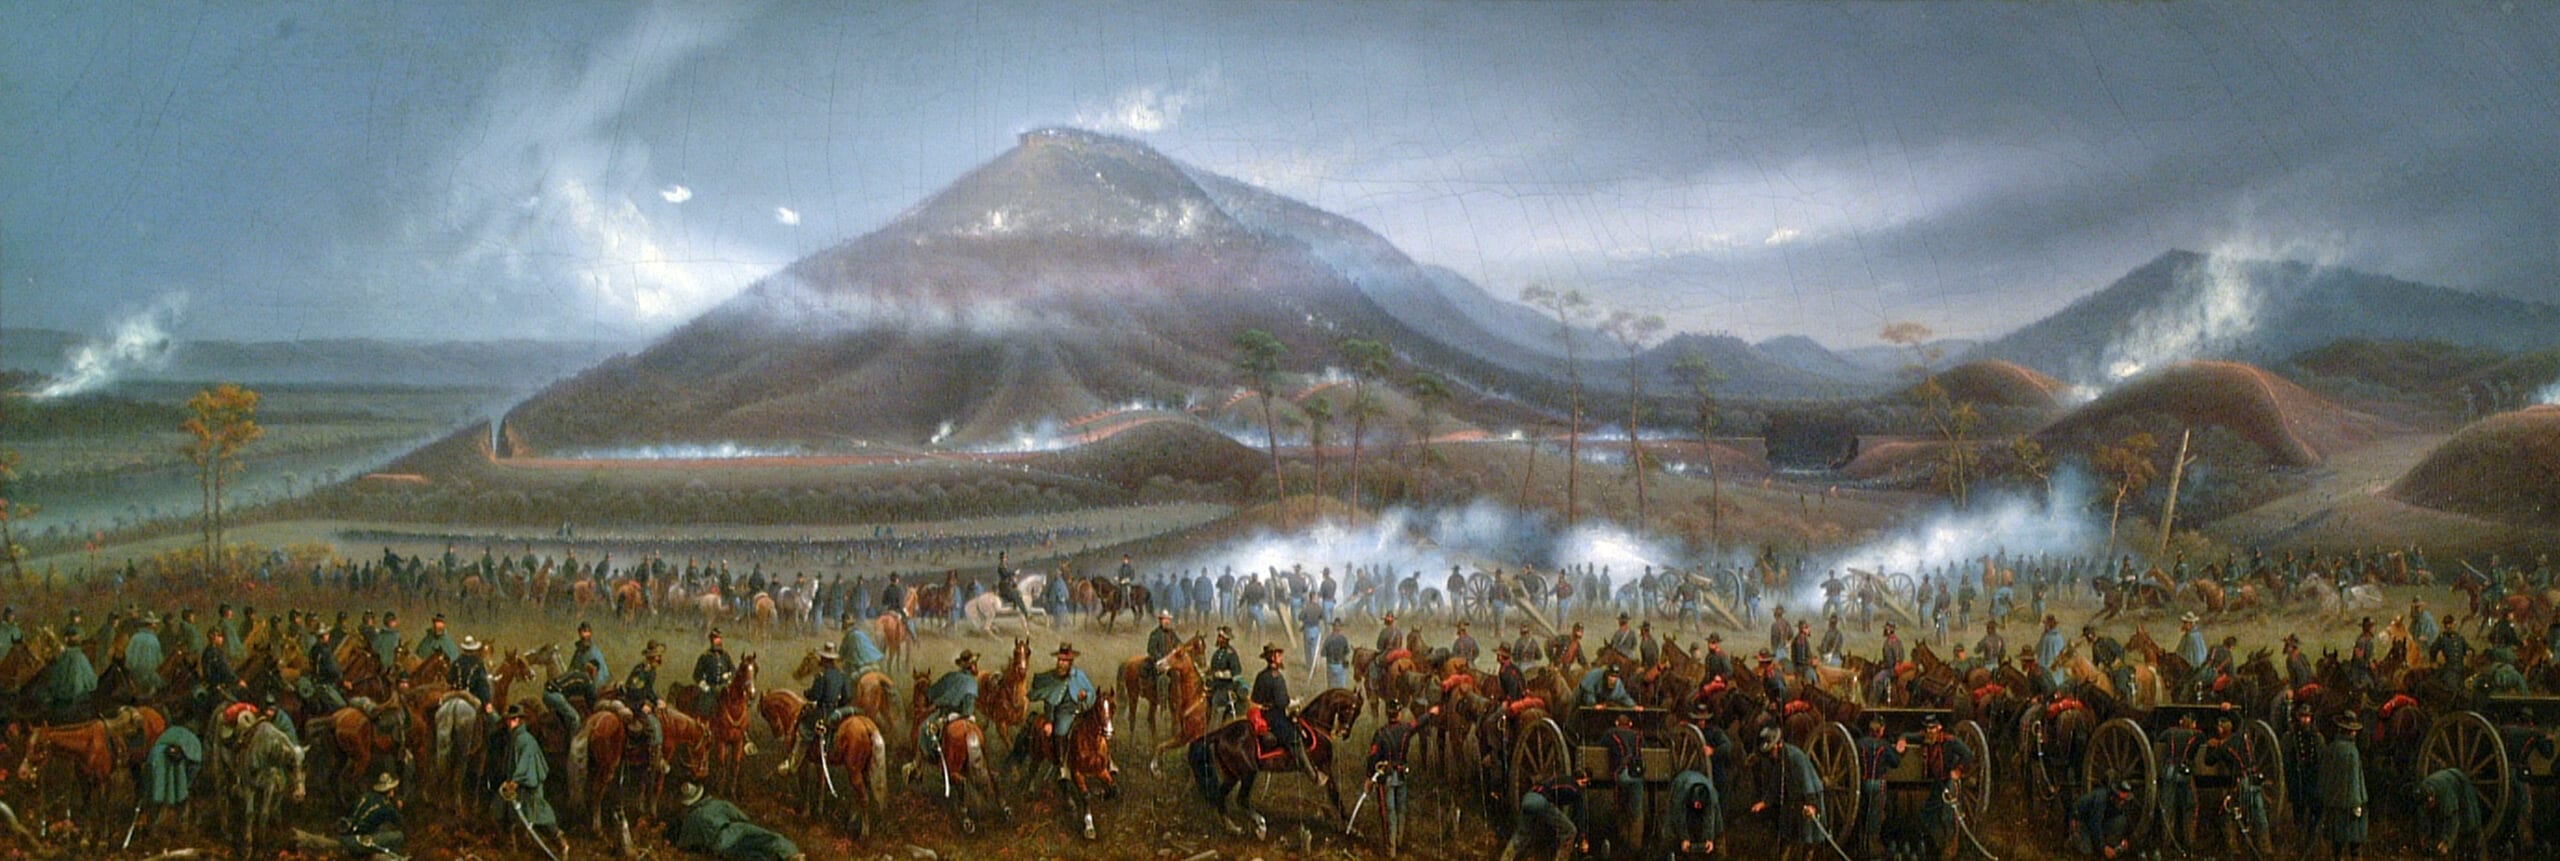 A painting shows a group of people in front of a mountain.